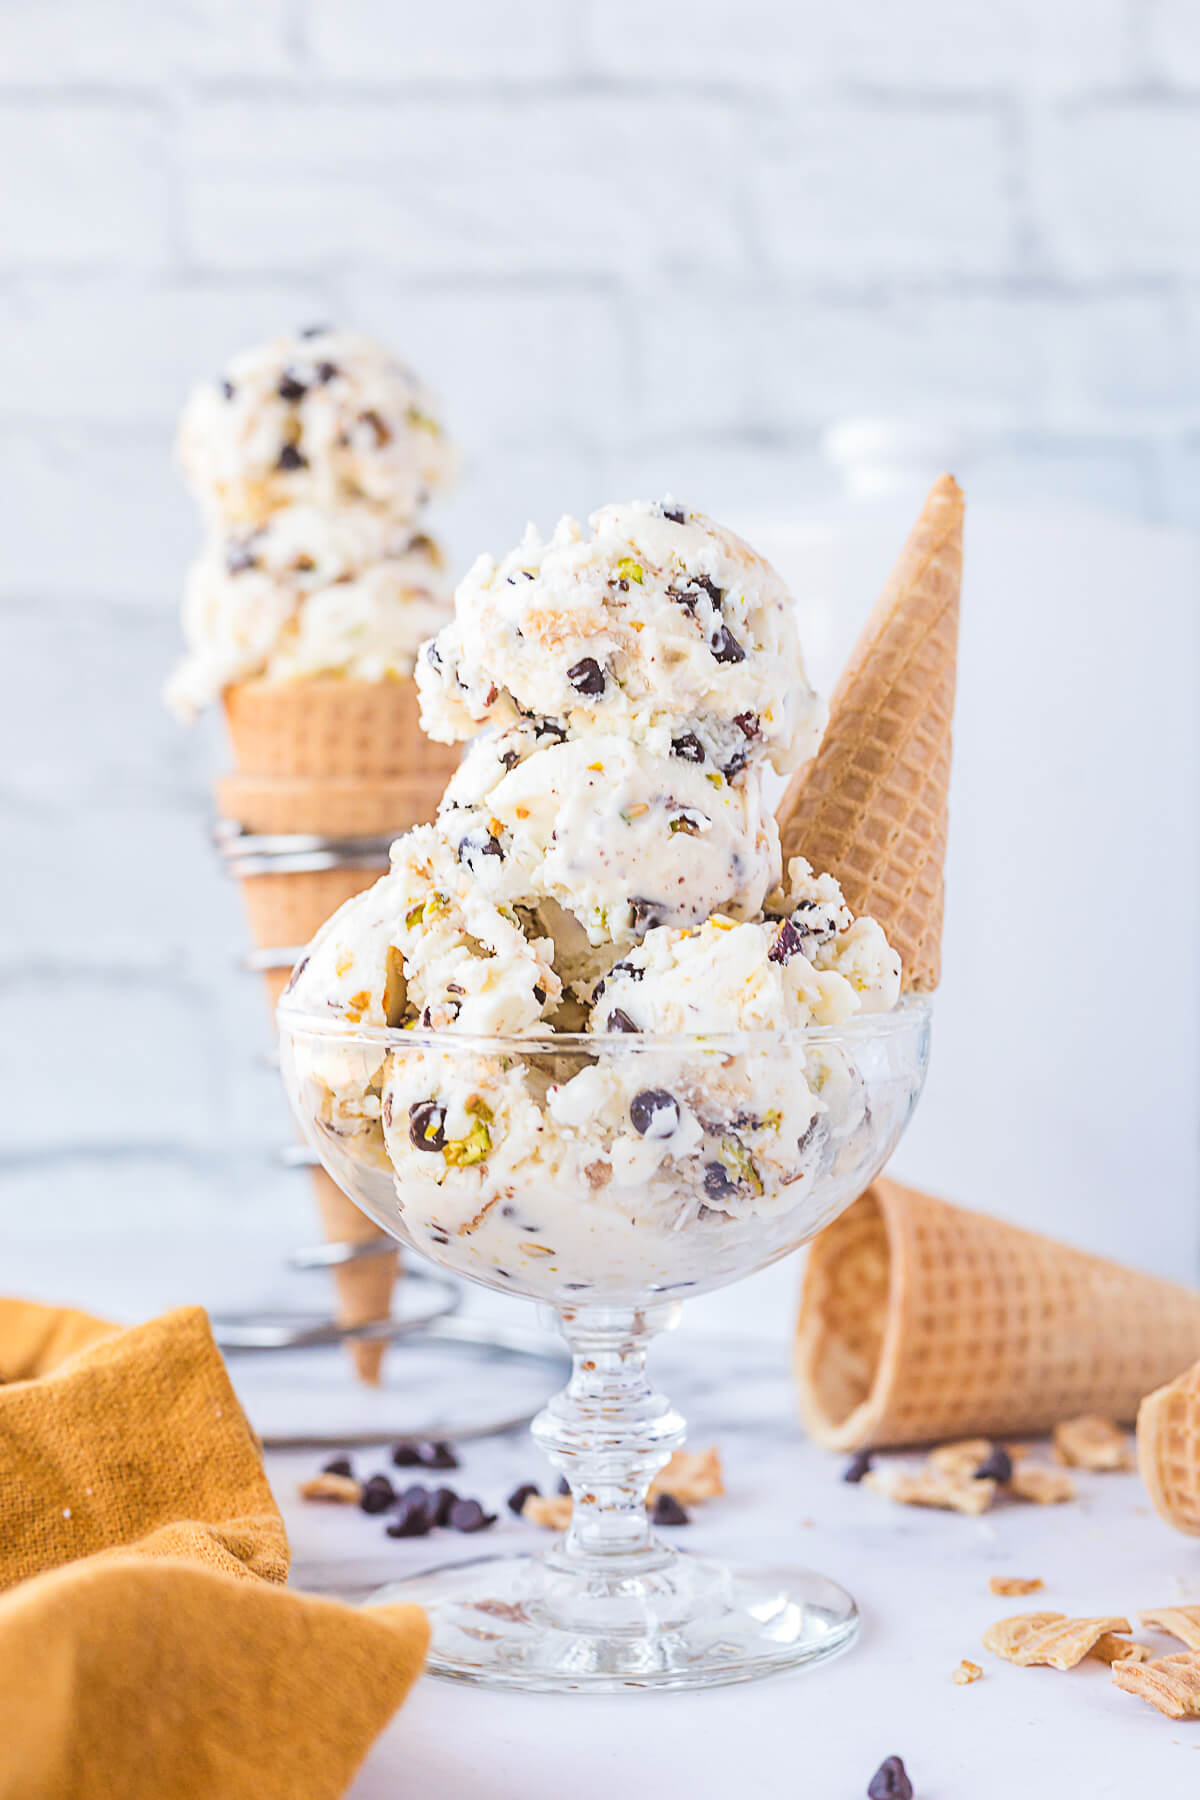 A glass bowl filled with white vanilla ice cream dotted with chocolate chips, pistachios, and broken sugar cone bits.